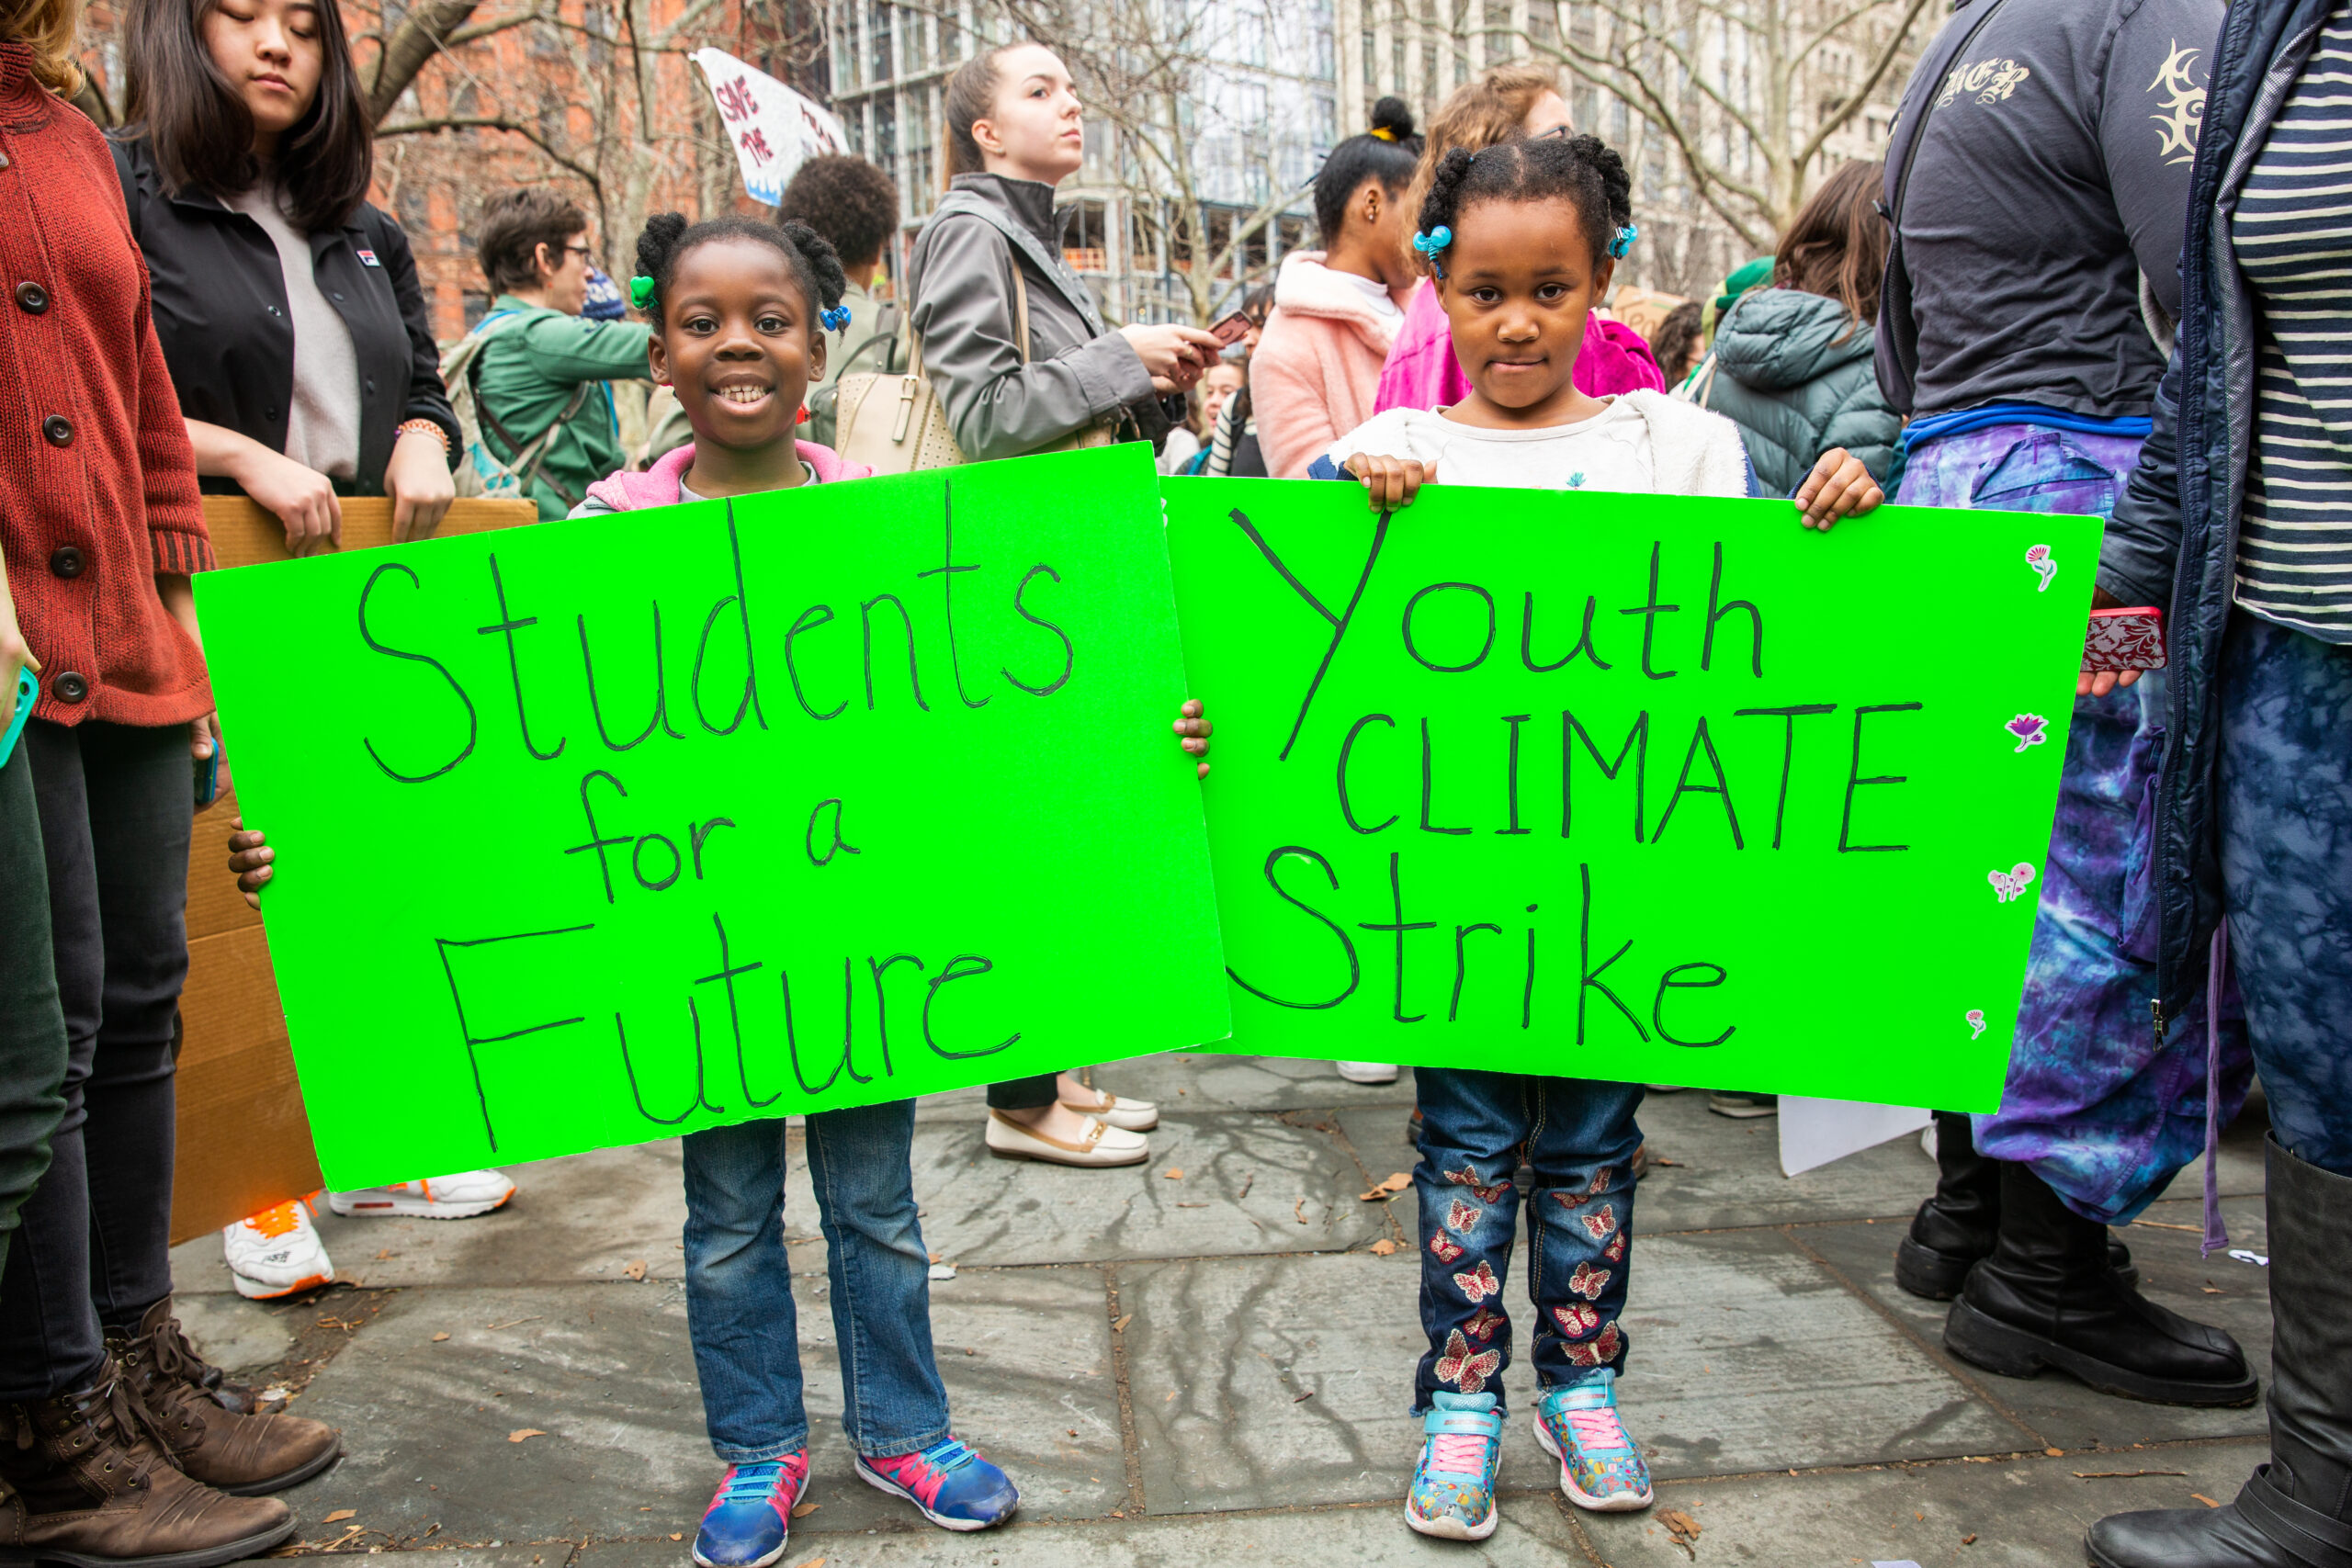 Student for Future Youth Climate Strike